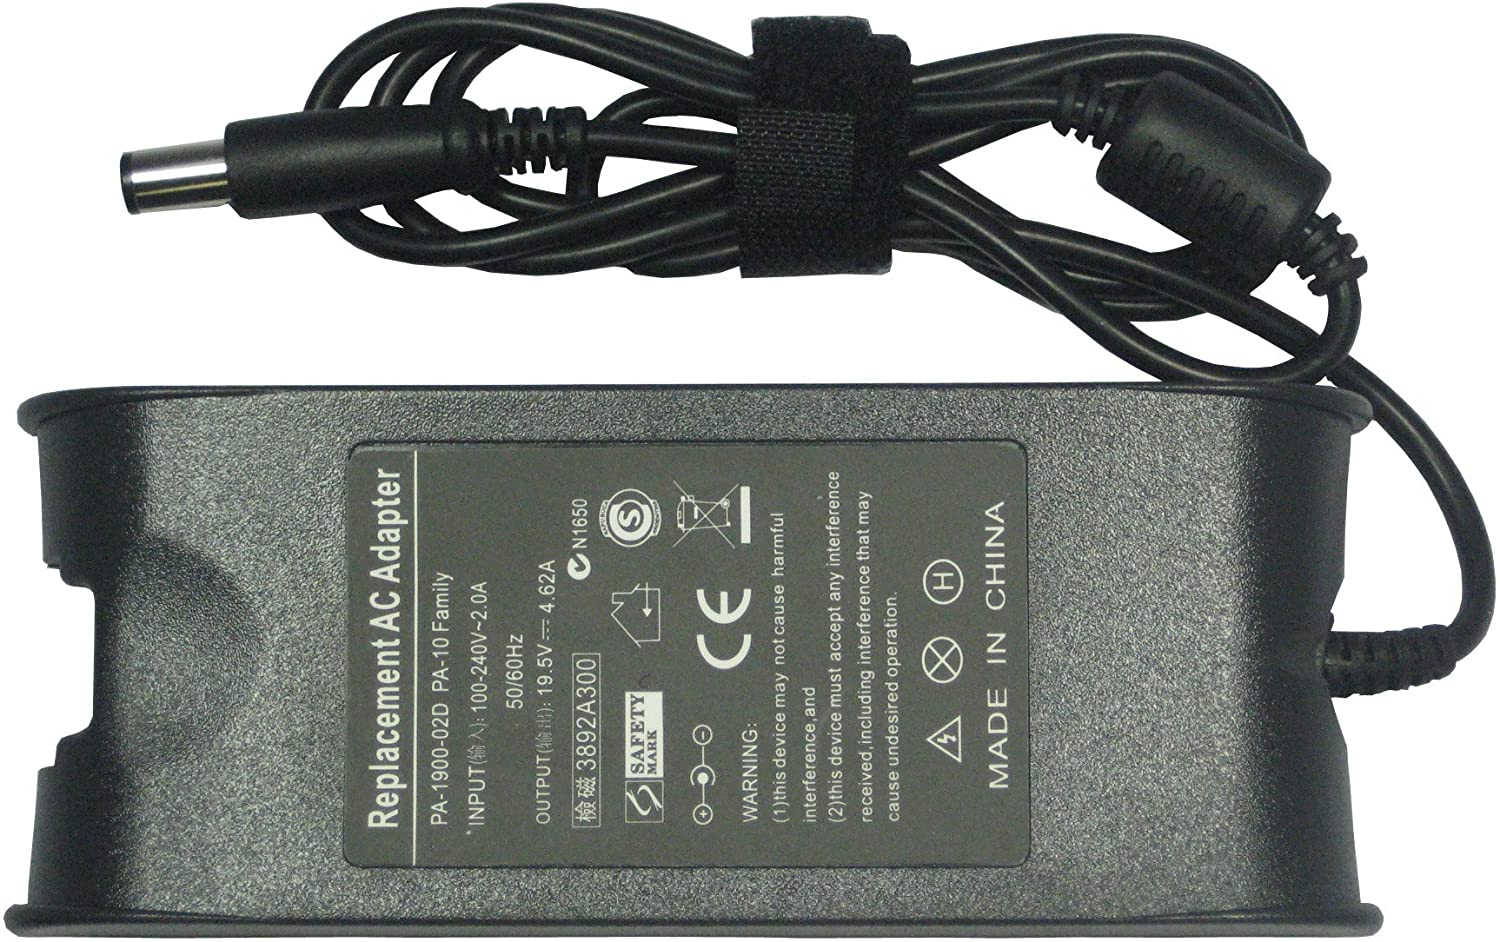 Ac Power Adapter for Dell Latitude D810 / D820 / X300 / X300 / D400 Pa-10 90w 19.5v 4.62a